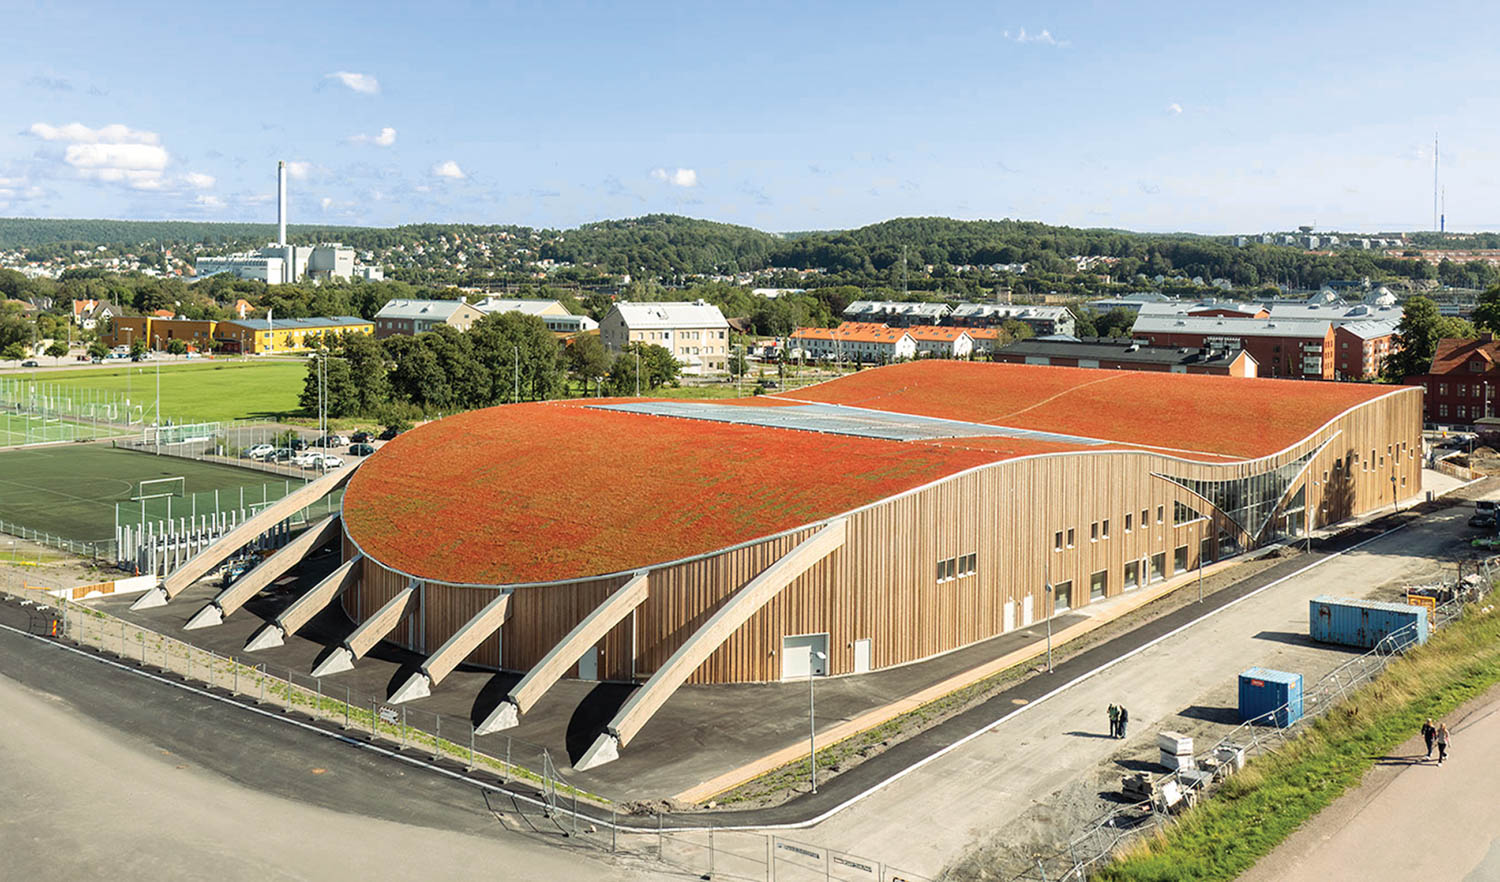 aerial view of a sports arena with orange roof